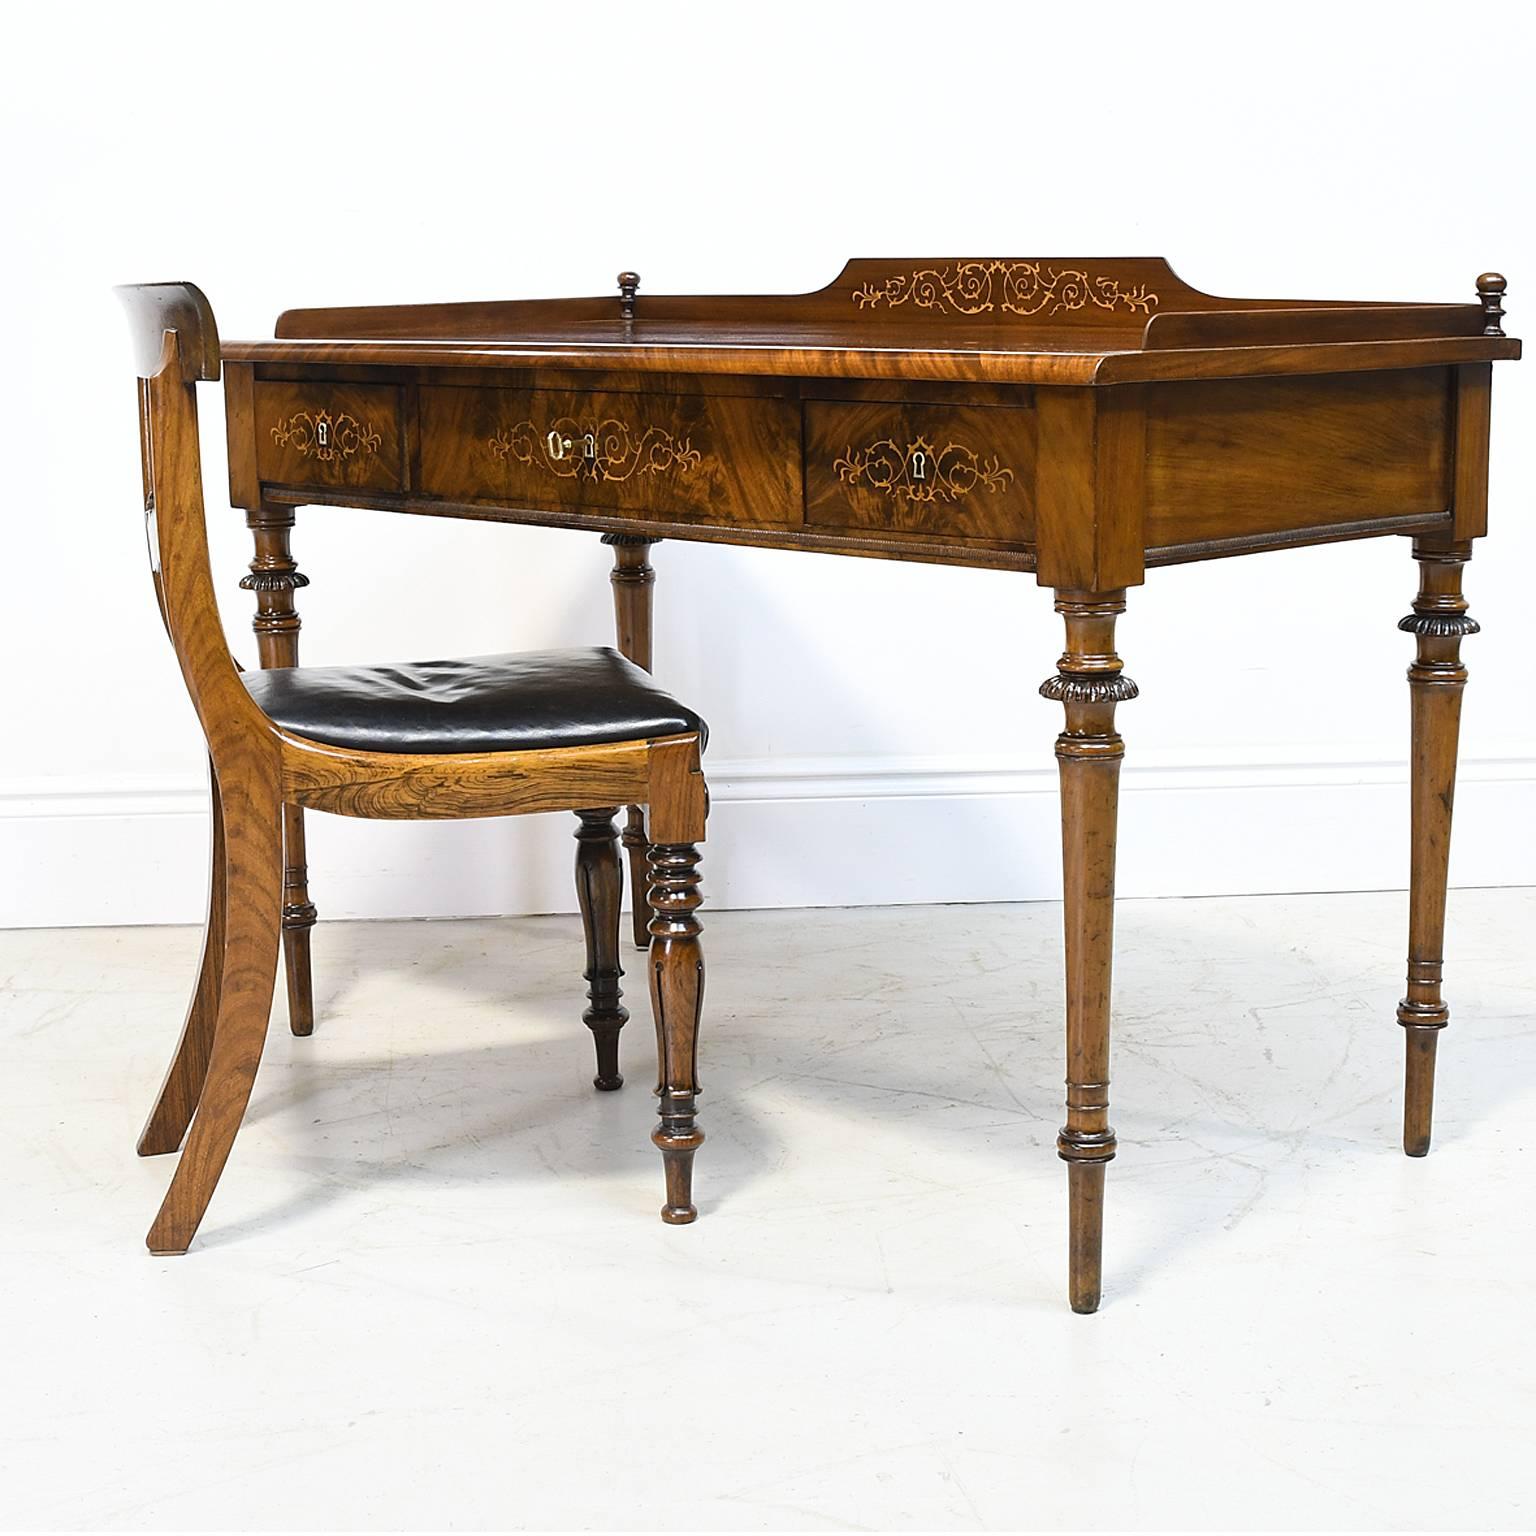 Mid-19th Century Antique Christian VIII Scandinavian Writing Desk in Mahogany with Marquetry